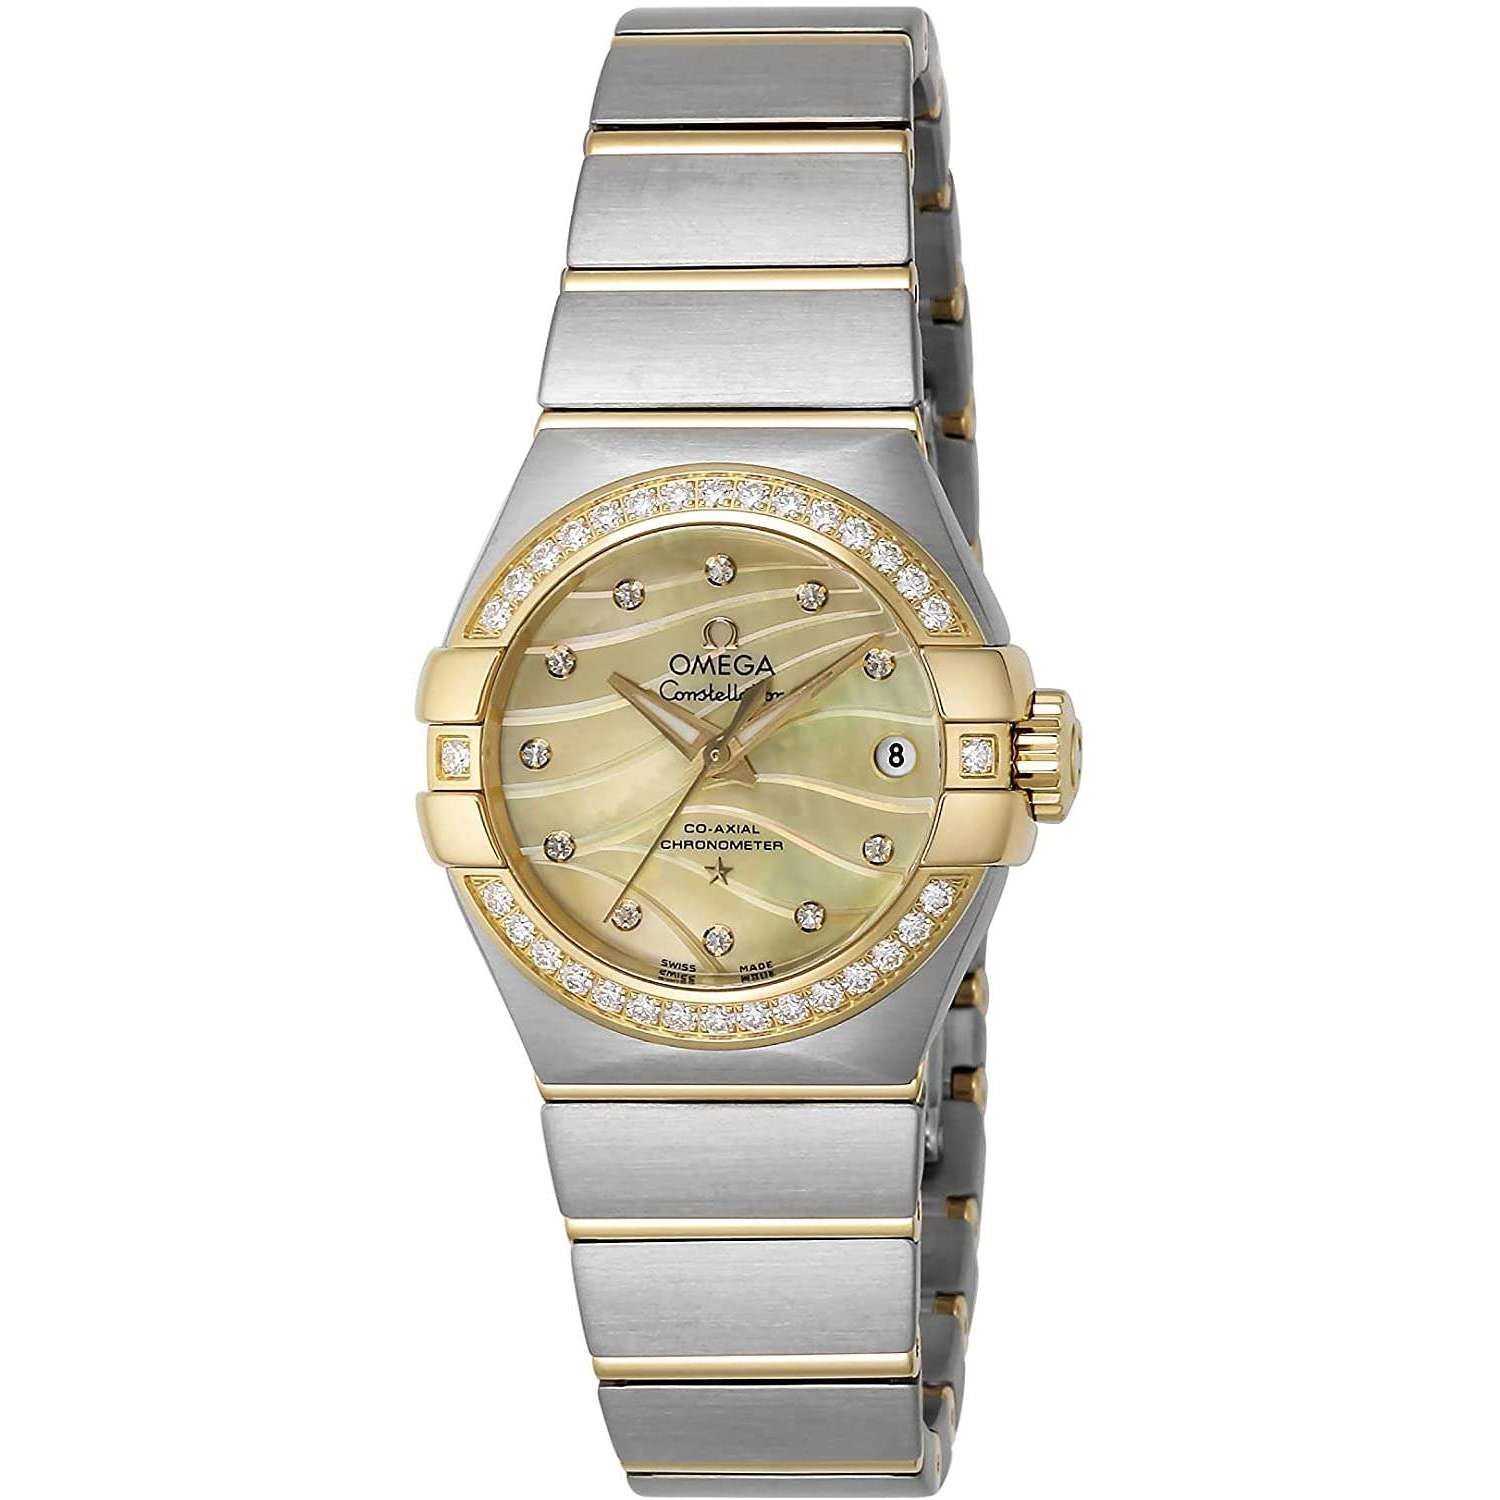 OMEGA CONSTELLATION CO-AXIAL CHRONOMETER 27 MM WOMEN WATCH 123.25.27.20.57.002 - ROOK JAPAN